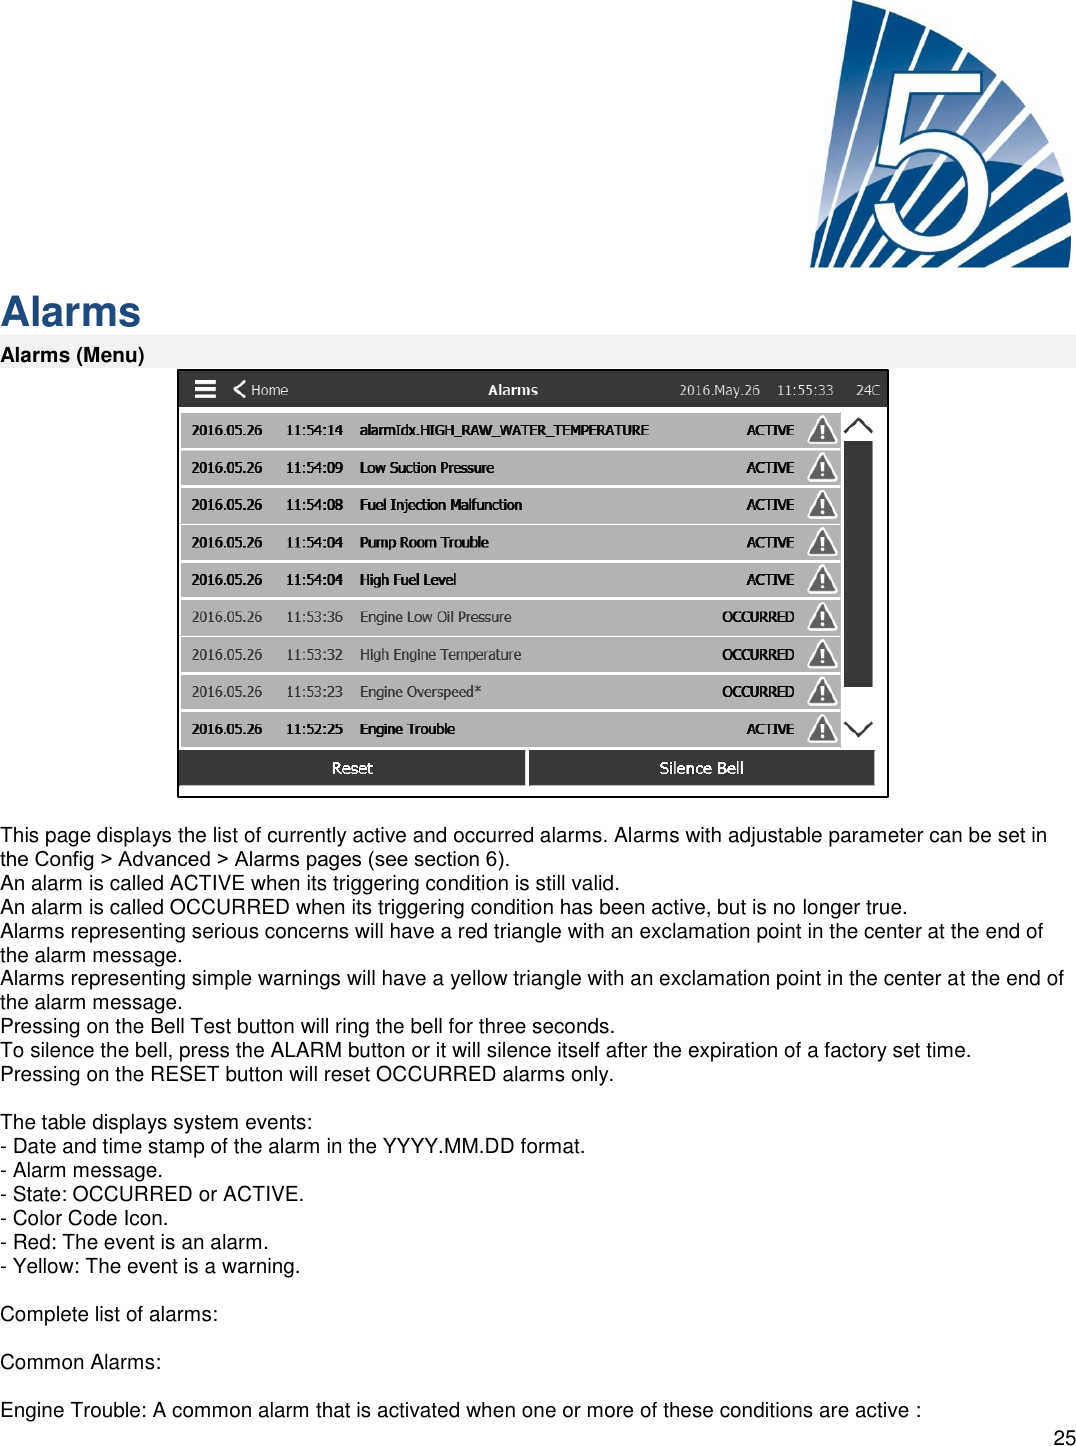    25      Alarms Alarms (Menu)   This page displays the list of currently active and occurred alarms. Alarms with adjustable parameter can be set in the Config ˃ Advanced ˃ Alarms pages (see section 6). An alarm is called ACTIVE when its triggering condition is still valid.  An alarm is called OCCURRED when its triggering condition has been active, but is no longer true.  Alarms representing serious concerns will have a red triangle with an exclamation point in the center at the end of the alarm message.  Alarms representing simple warnings will have a yellow triangle with an exclamation point in the center at the end of the alarm message. Pressing on the Bell Test button will ring the bell for three seconds. To silence the bell, press the ALARM button or it will silence itself after the expiration of a factory set time.  Pressing on the RESET button will reset OCCURRED alarms only.   The table displays system events: - Date and time stamp of the alarm in the YYYY.MM.DD format. - Alarm message. - State: OCCURRED or ACTIVE. - Color Code Icon. - Red: The event is an alarm. - Yellow: The event is a warning.  Complete list of alarms:  Common Alarms:  Engine Trouble: A common alarm that is activated when one or more of these conditions are active : 